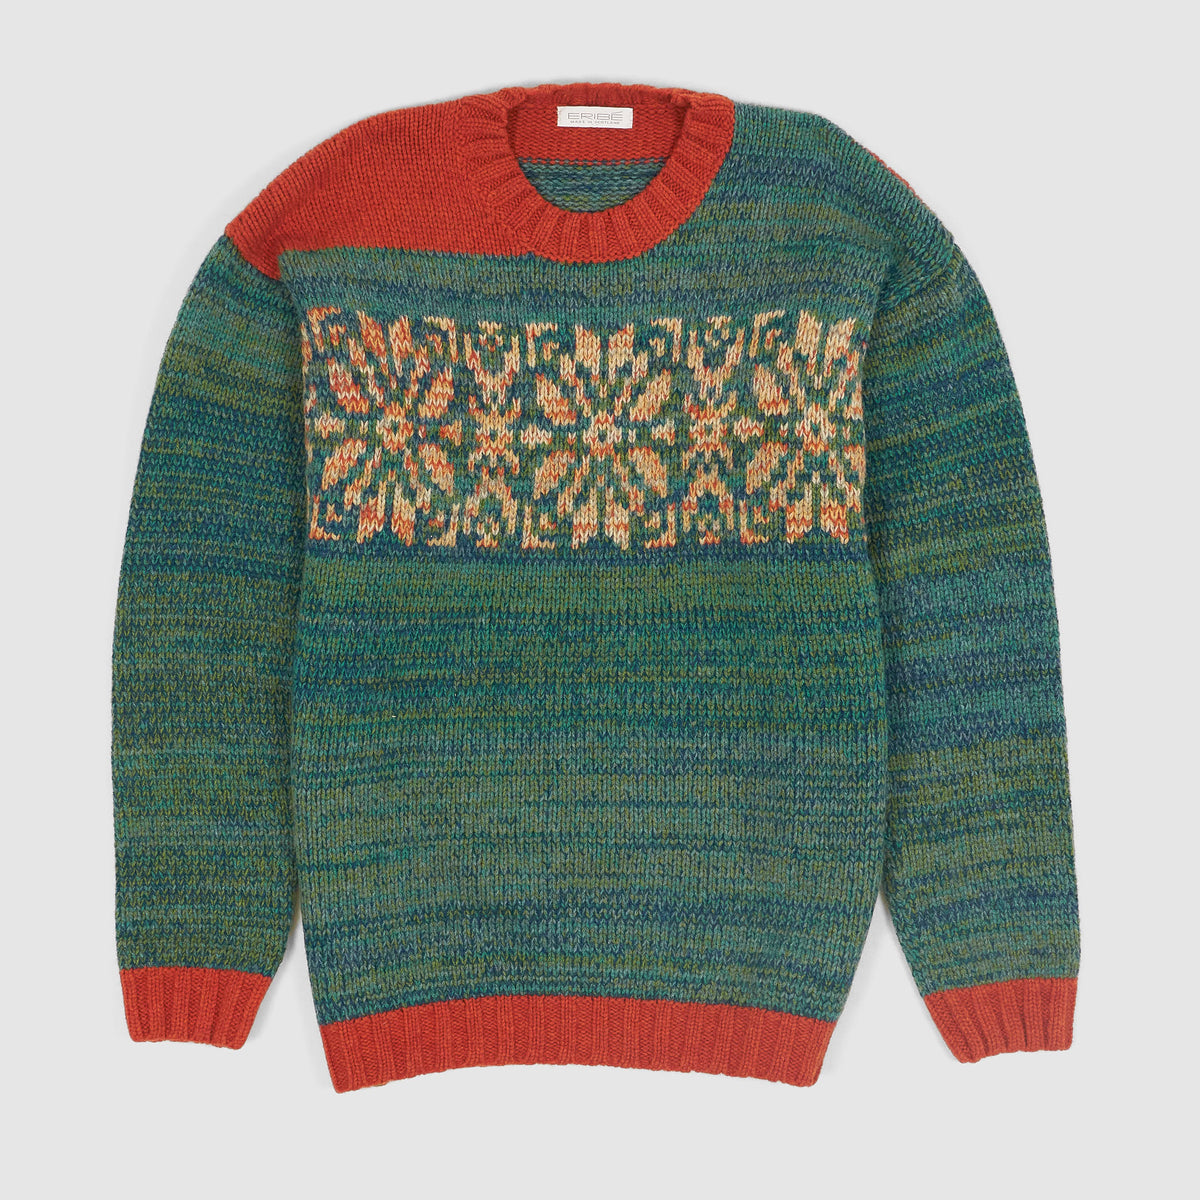 Eribé Knitwear  Crew-Neck Patterned Knitted Pullover